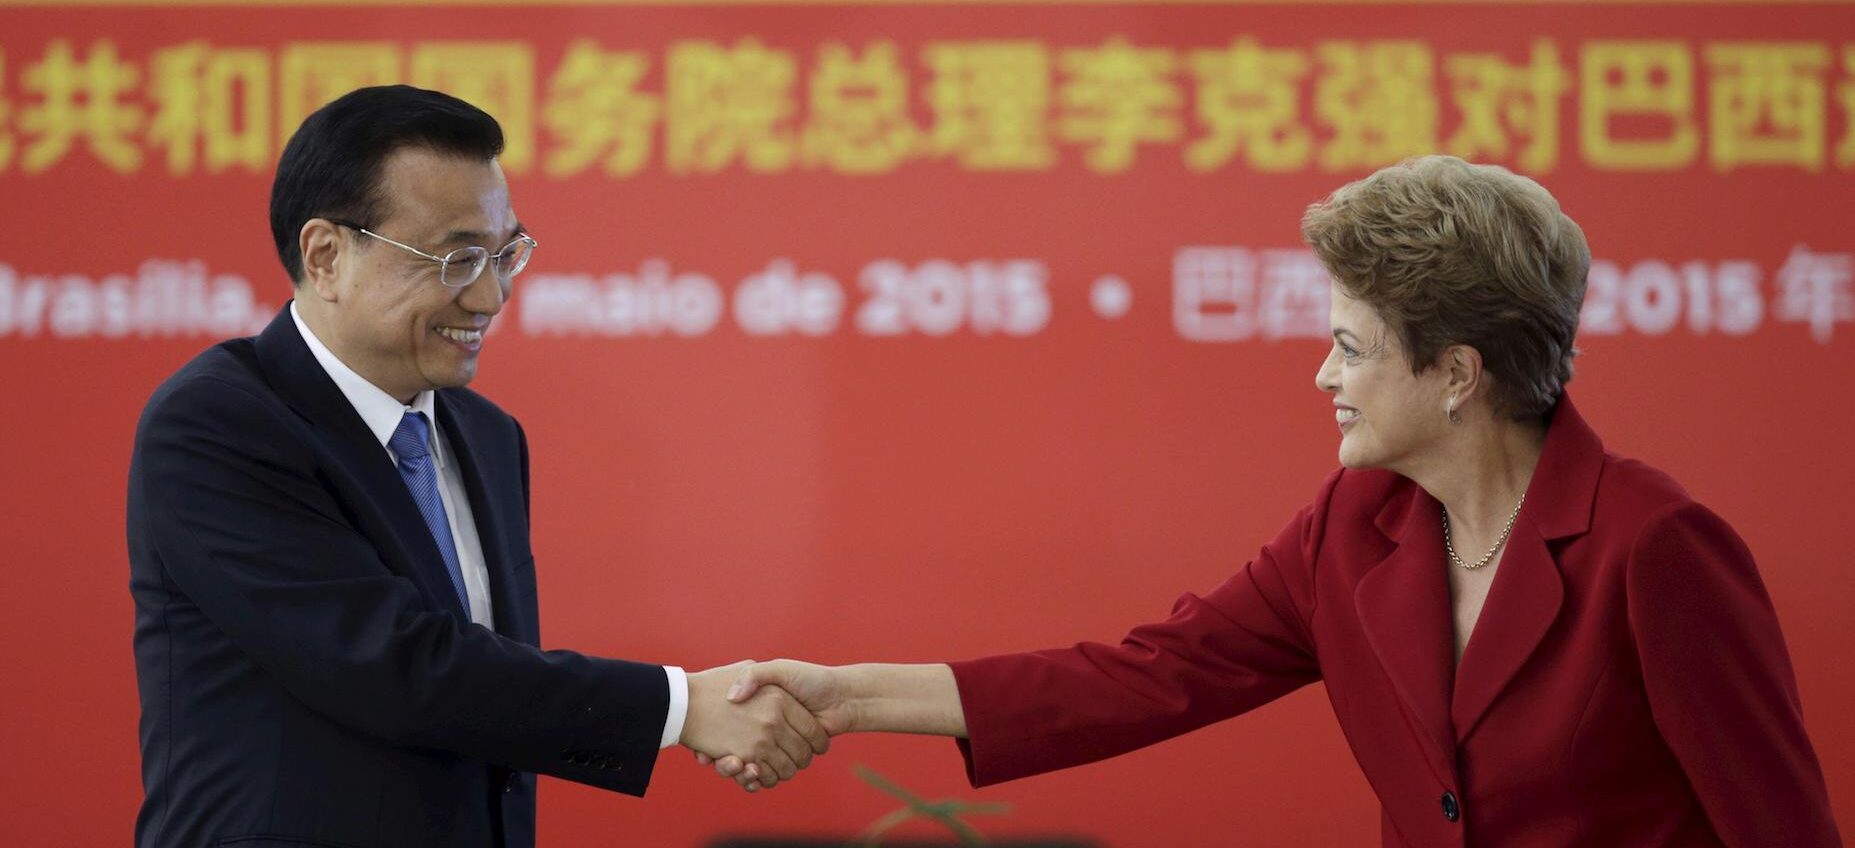 Premier Li Keqiang and then-President Dilma Rousseff